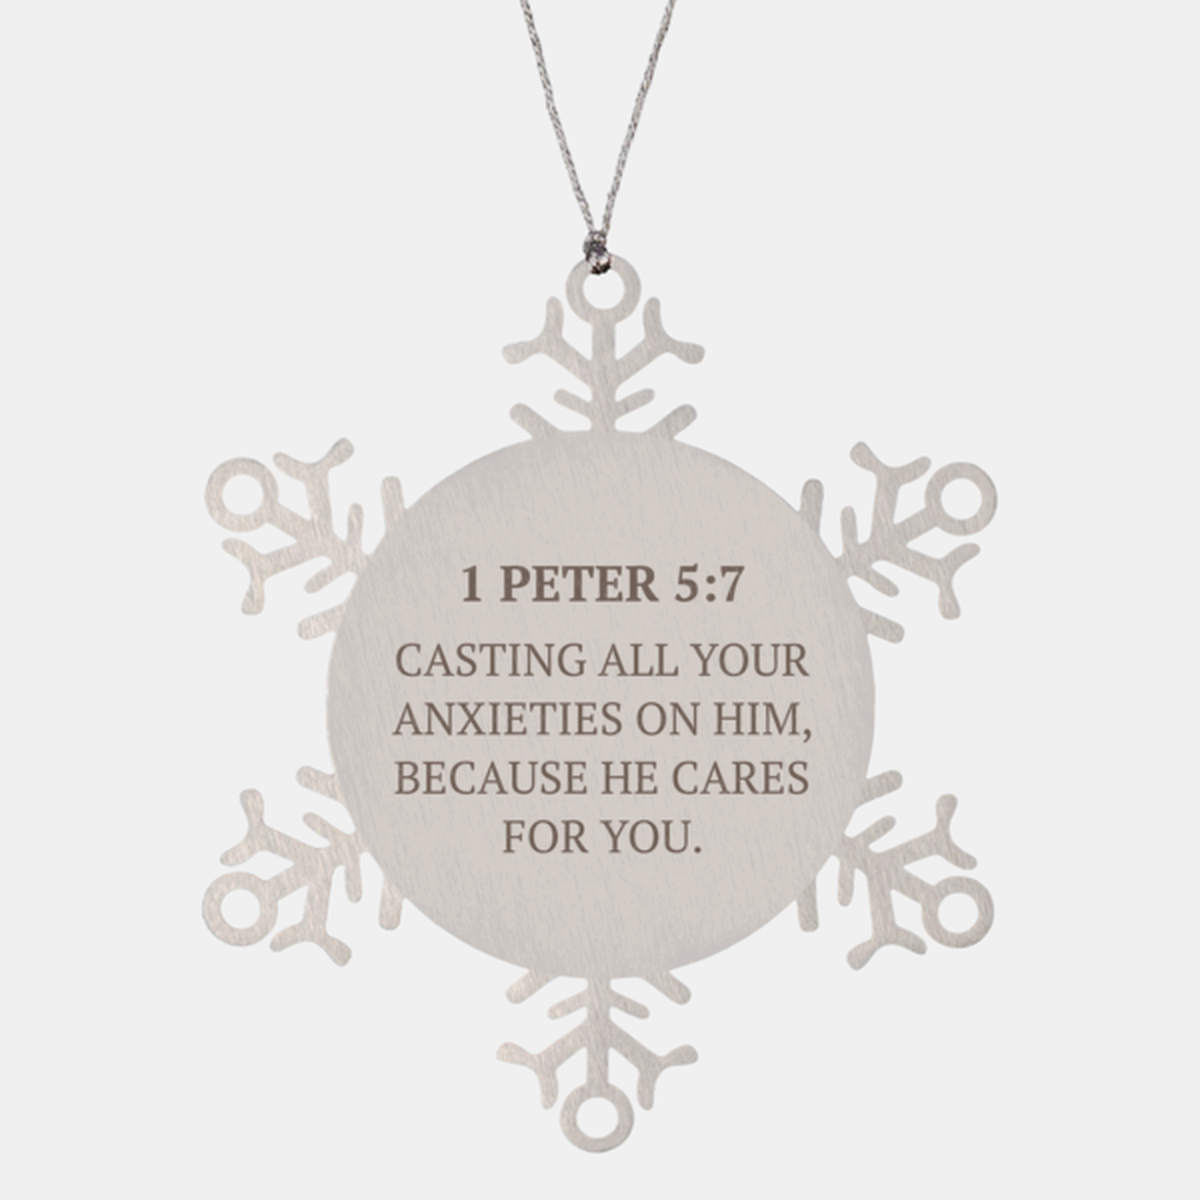 Christian Ornaments For Christmas Tree, Casting All Your Anxieties On Him, Religious Christmas Decorations, Scripture Ornaments Gifts, Bible Verse Ornament